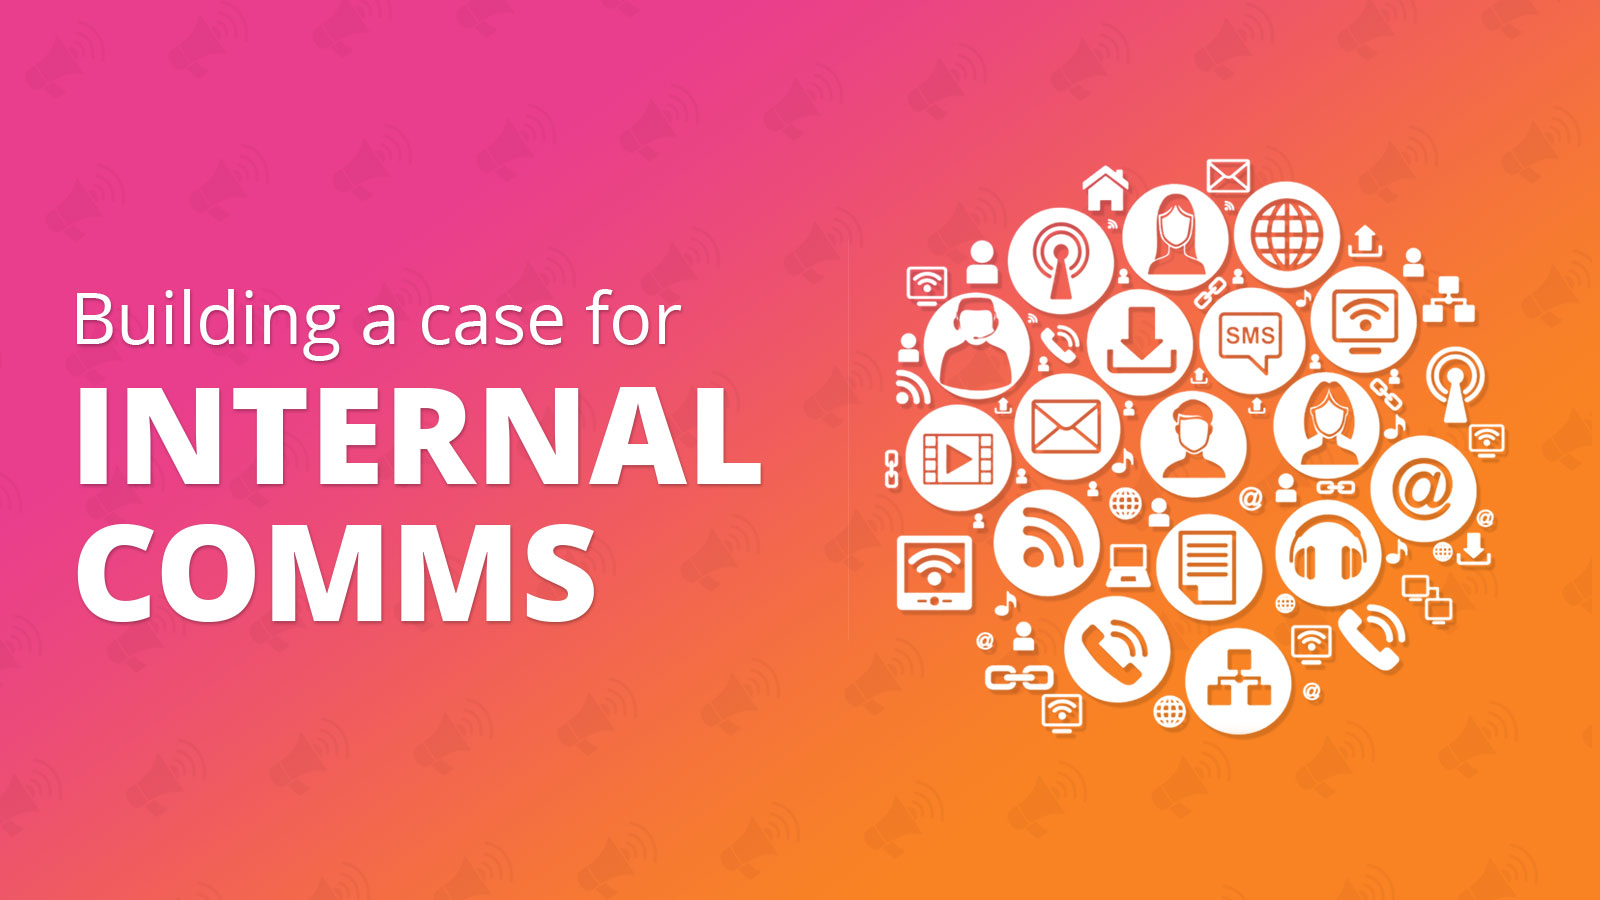 Building a business case for internal comms